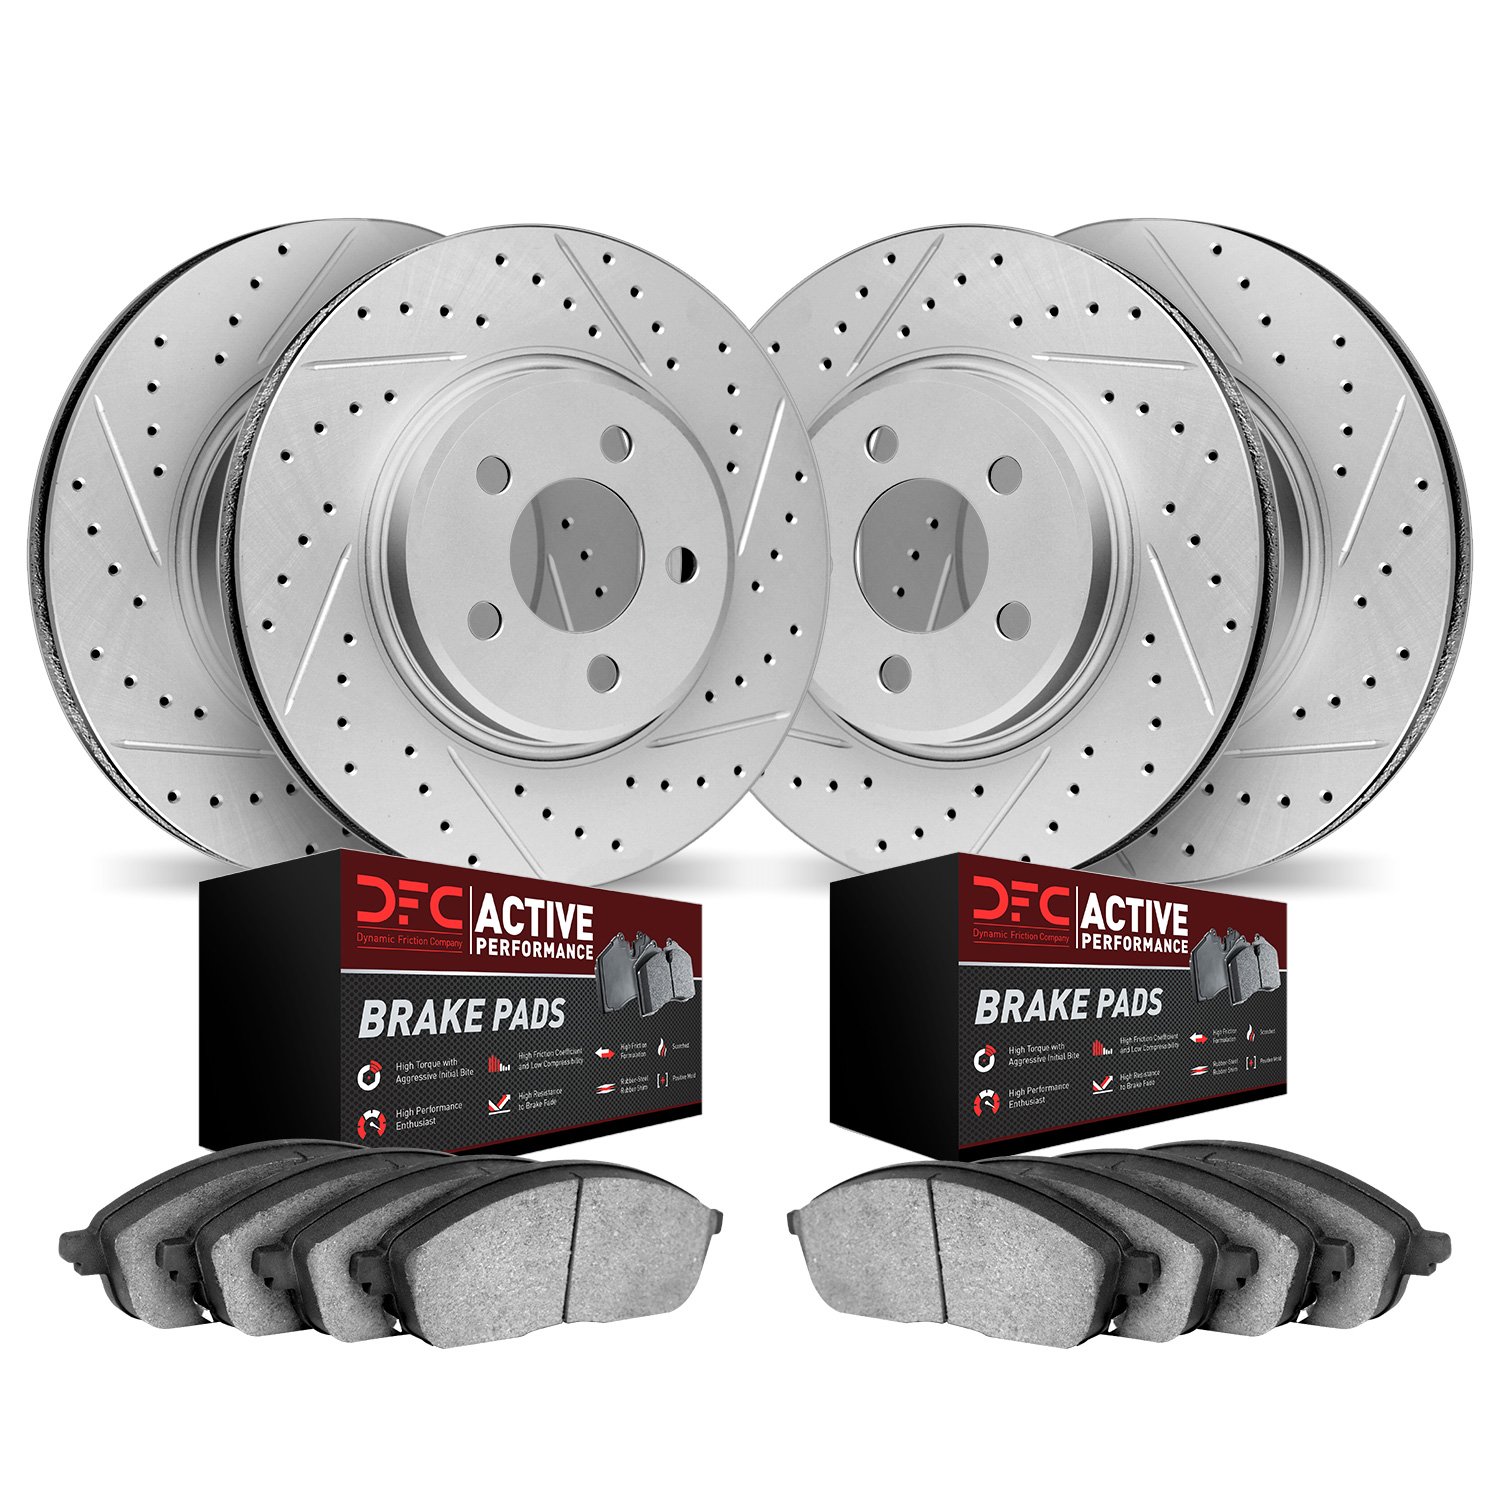 2704-46006 Geoperformance Drilled/Slotted Brake Rotors with Active Performance Pads Kit, 2003-2007 GM, Position: Front and Rear